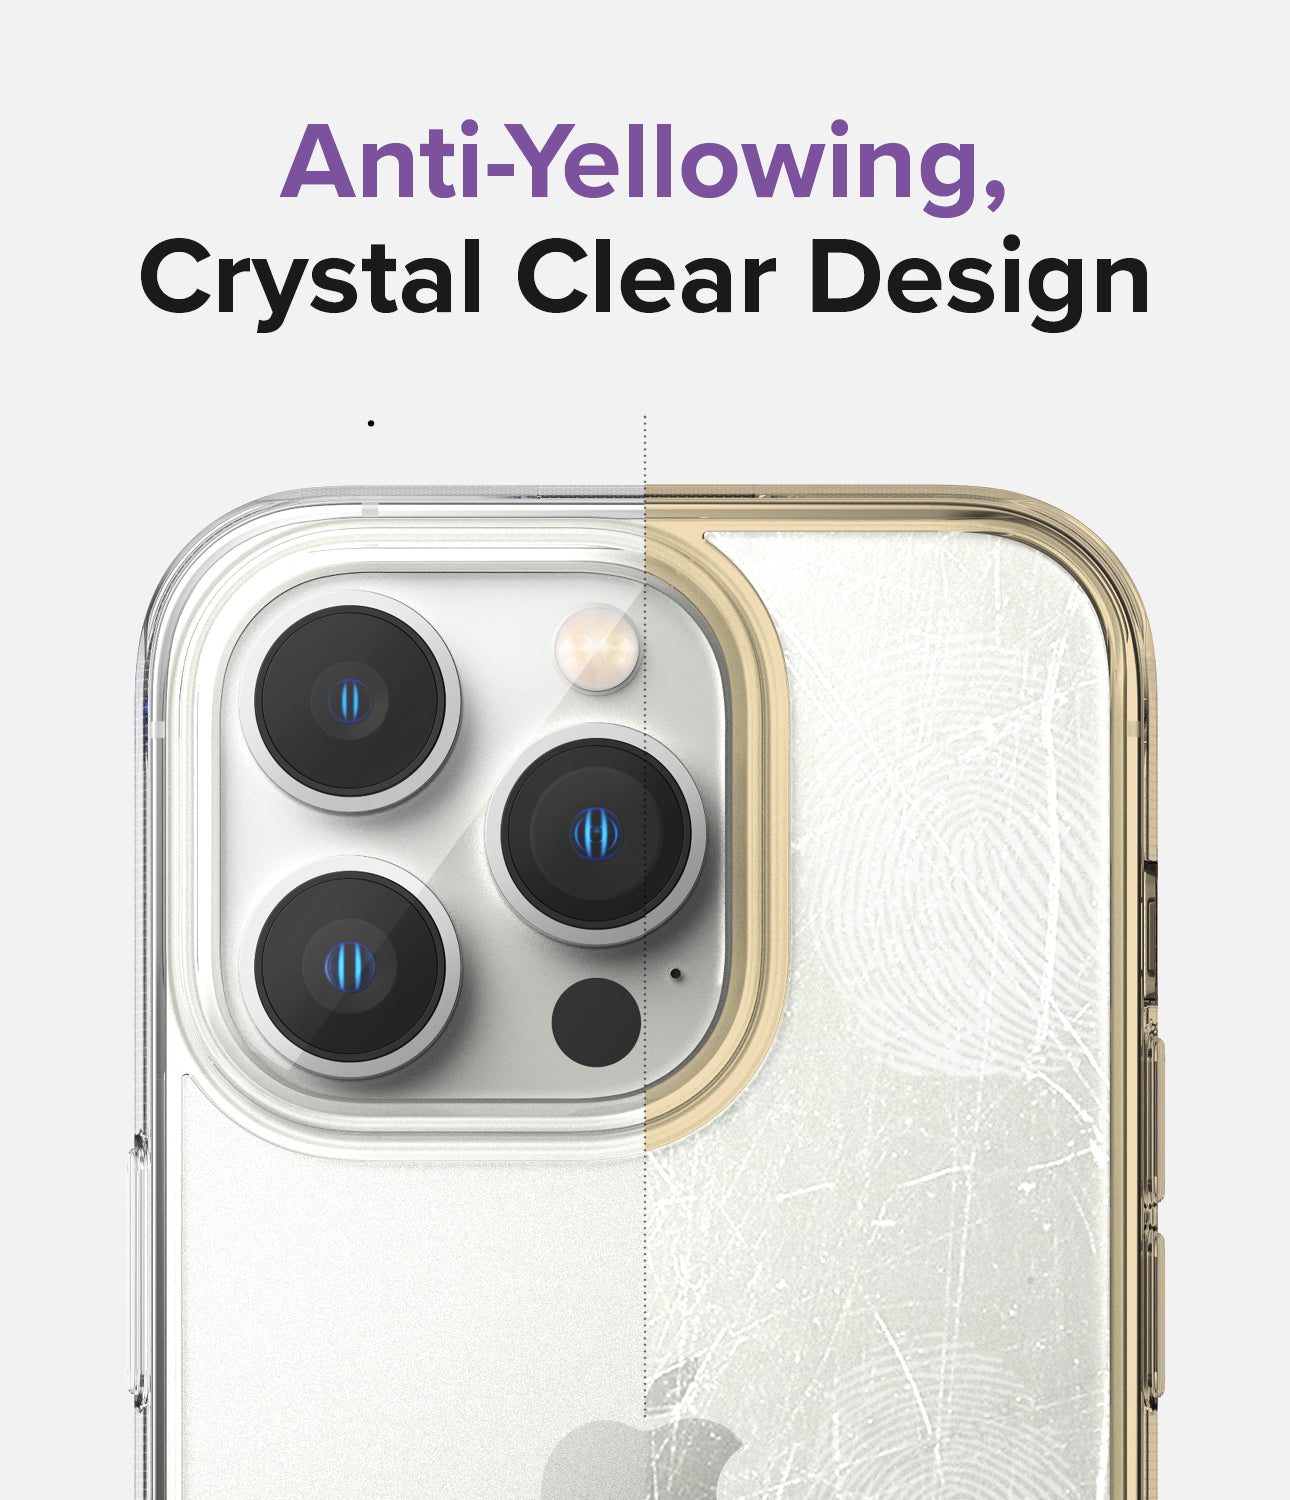 Anti-Yellowing, Crystal Clear Design